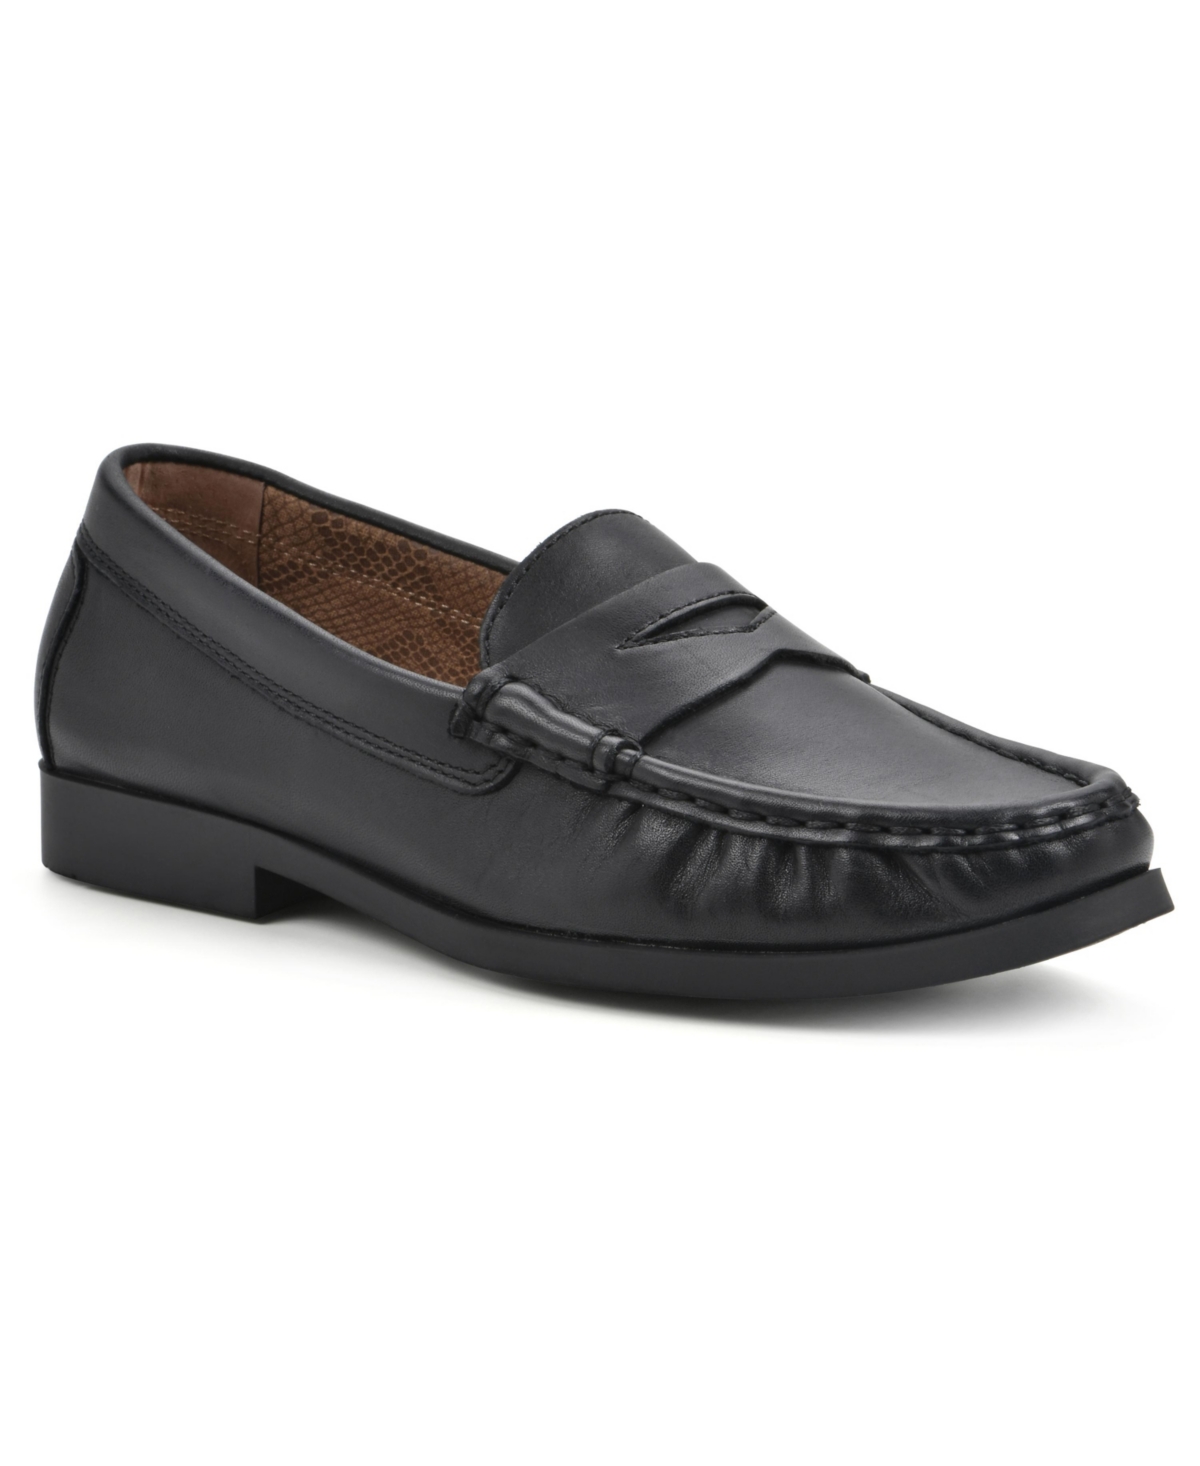 Women's Cashews Tailored Loafers - Black Leather